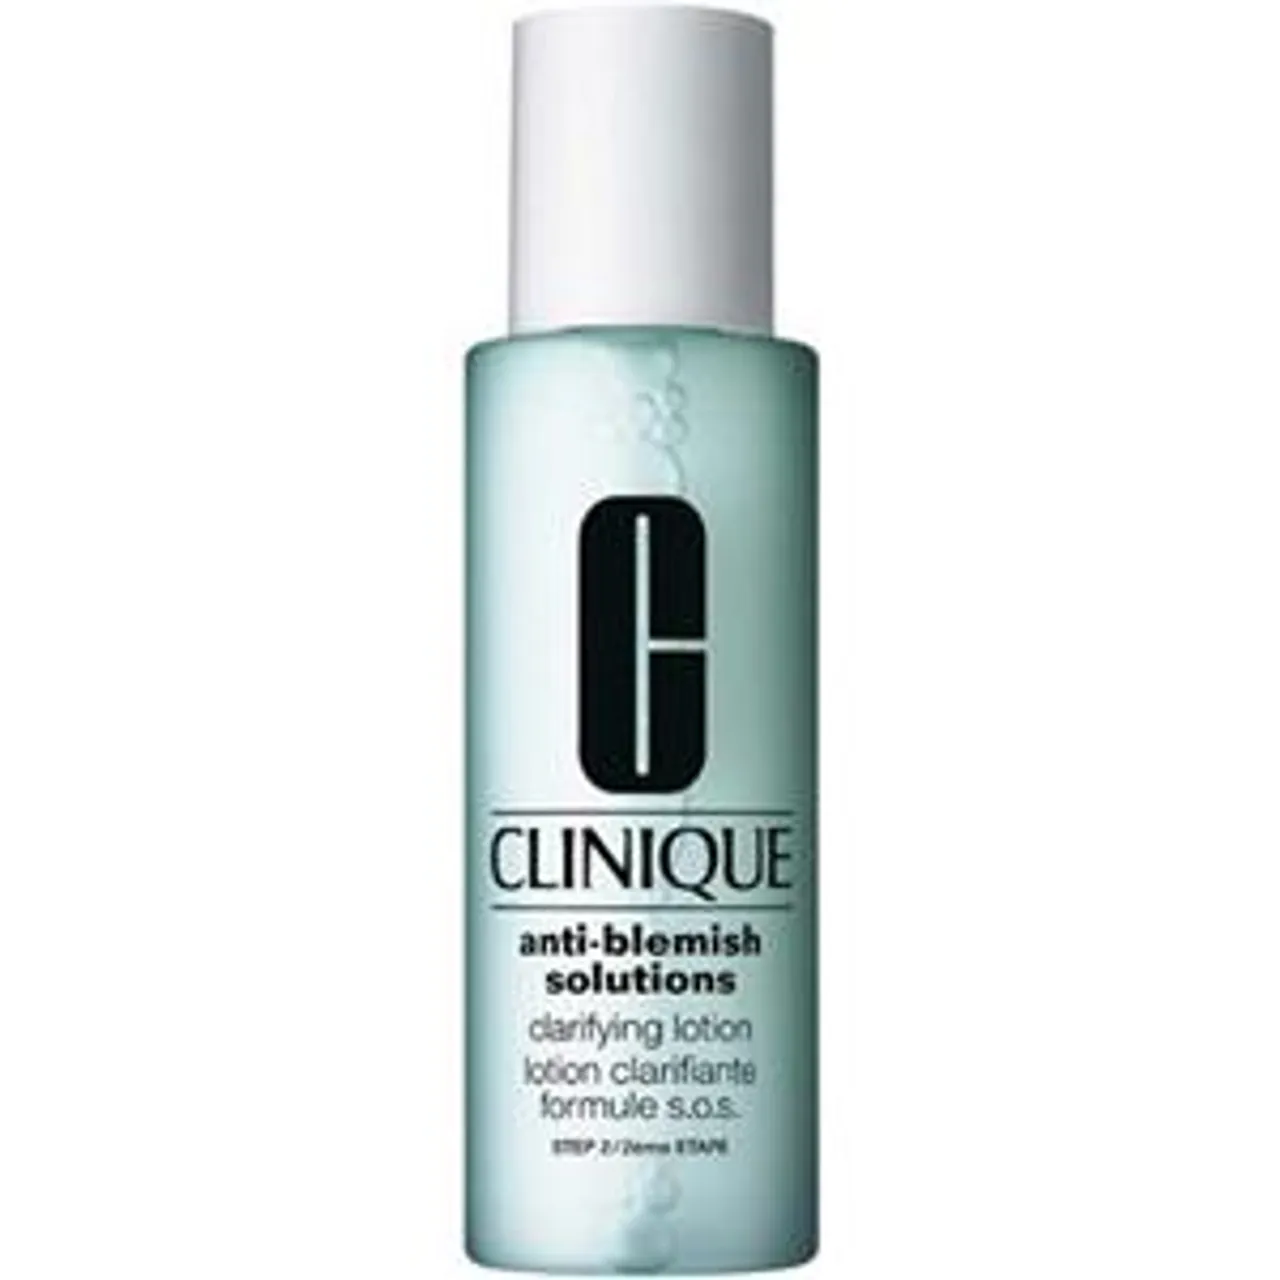 Clinique Anti-Blemish Solutions Clarifying Lotion 0 200 ml